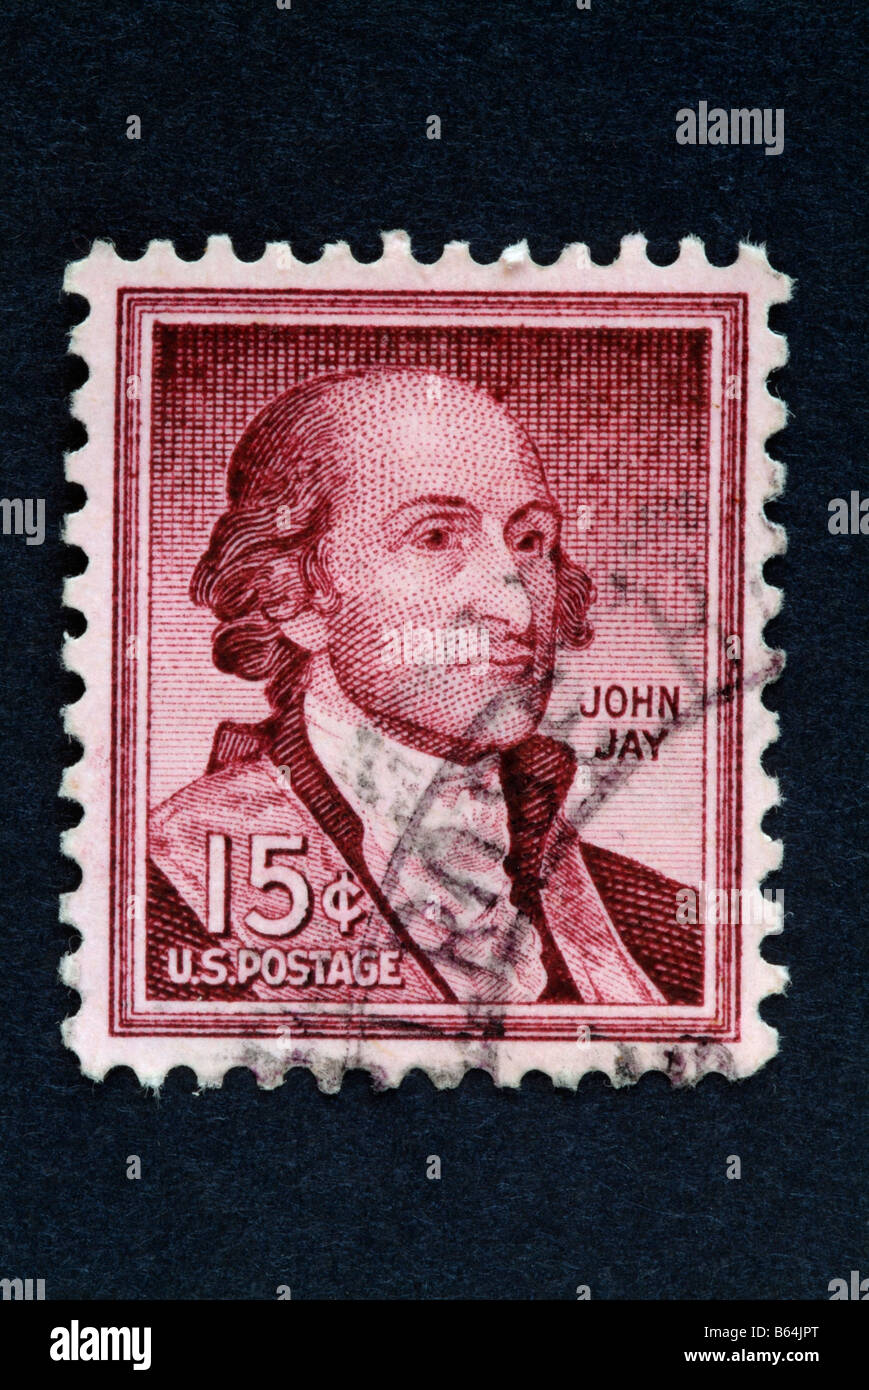 FAKE U.S. POSTAGE STAMPS SHOW UP IN SIOUX CITY - KSCJ 1360